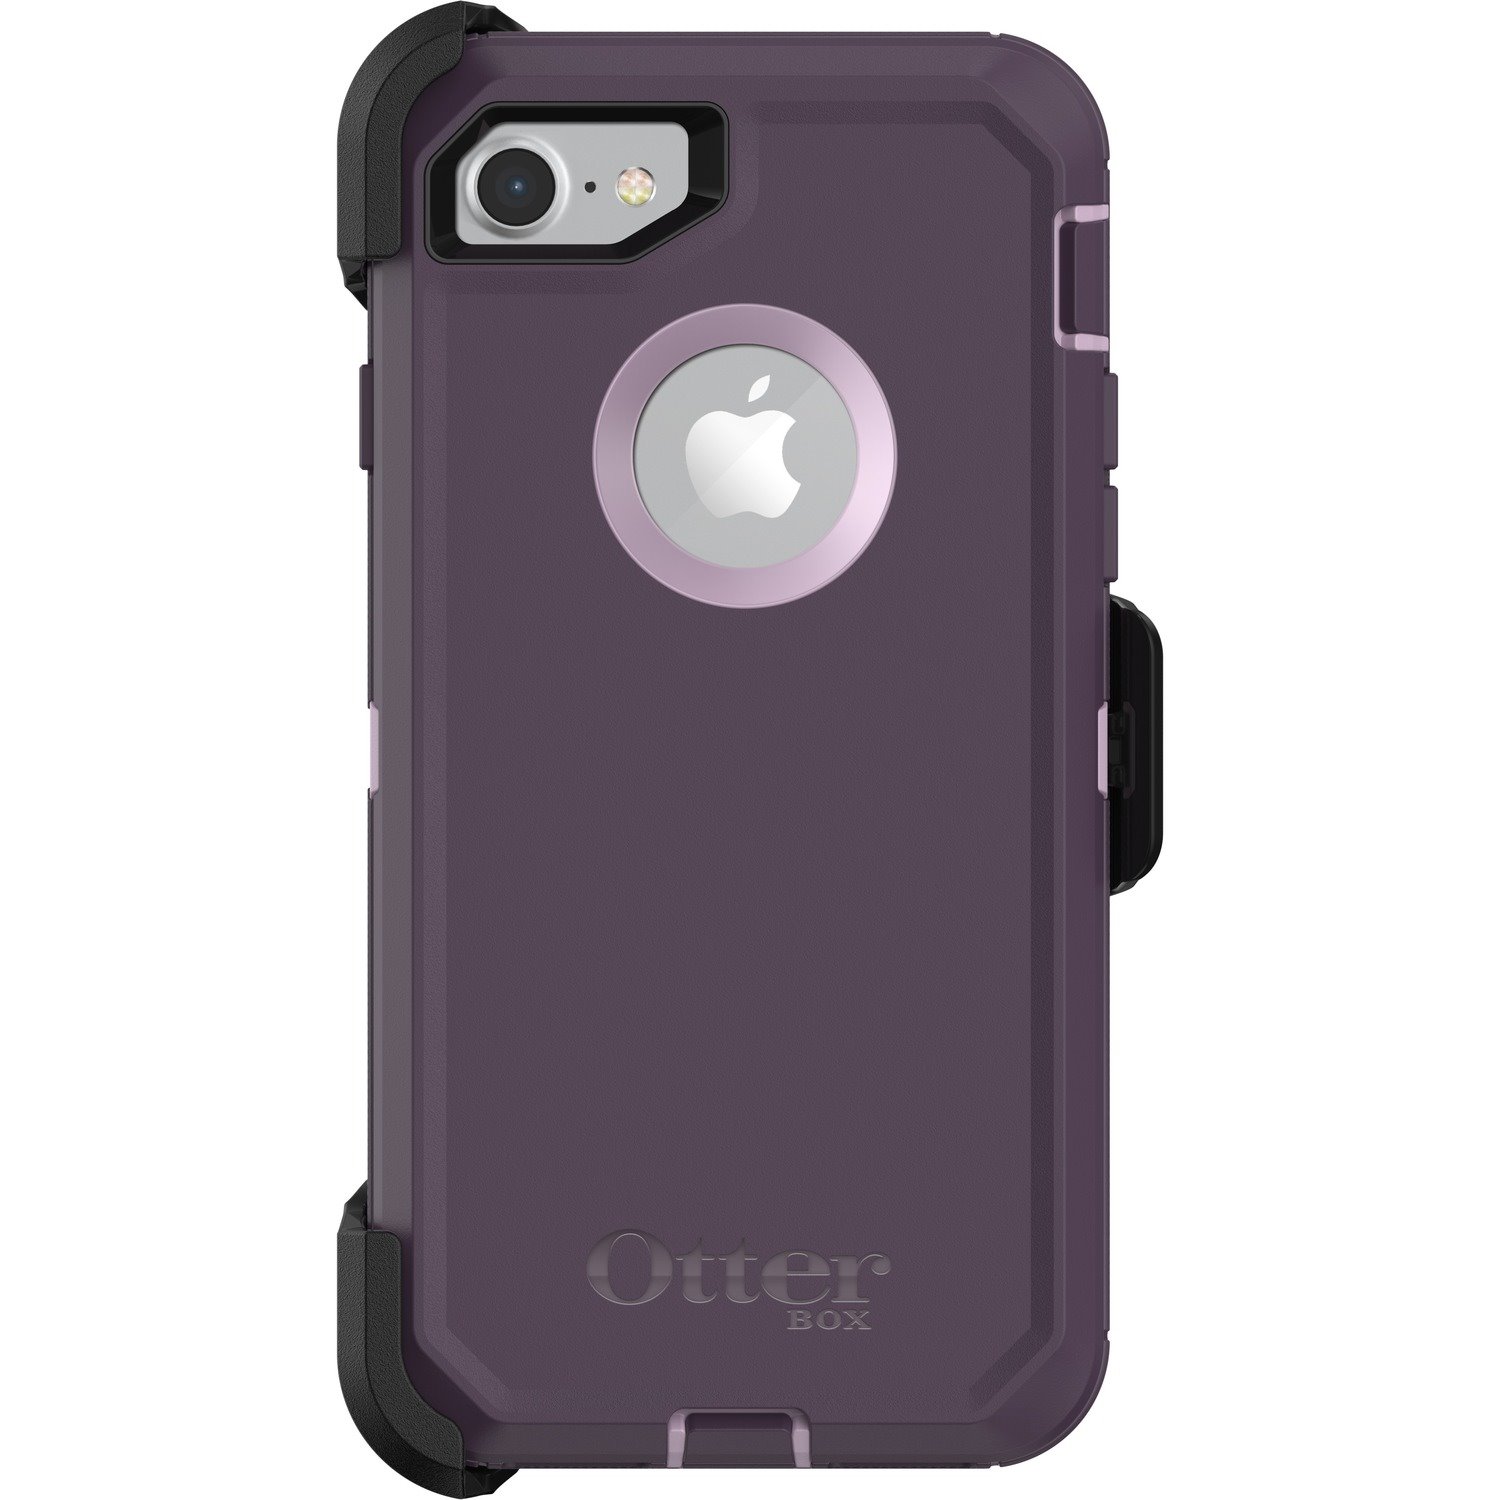 OtterBox Defender Carrying Case (Holster) Apple iPhone 8, iPhone 7 Smartphone - Purple Nebula